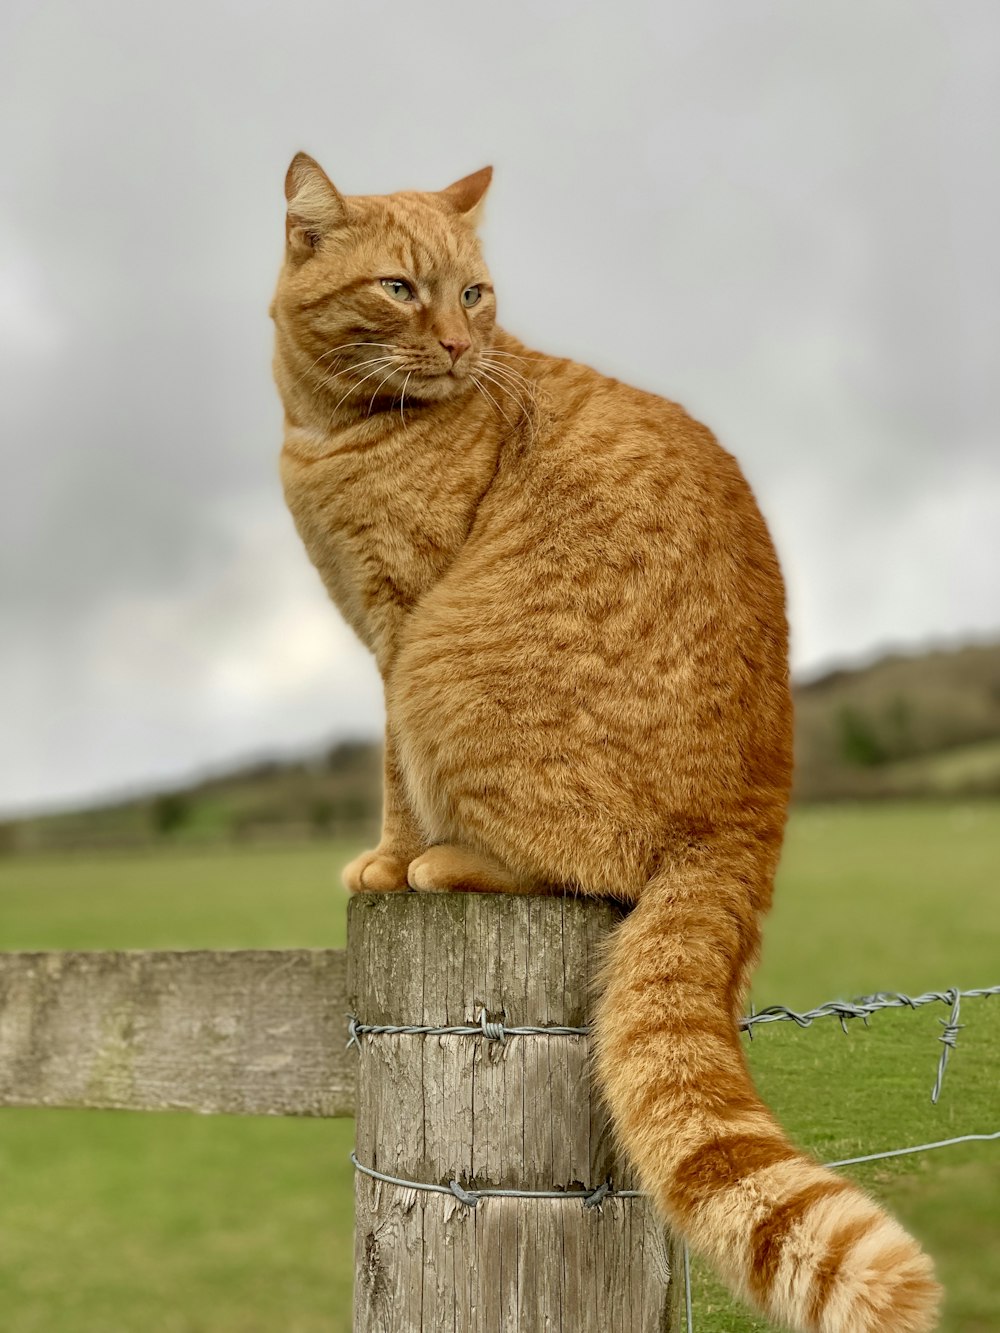 orange tabby cat on brown wooden fence during daytime